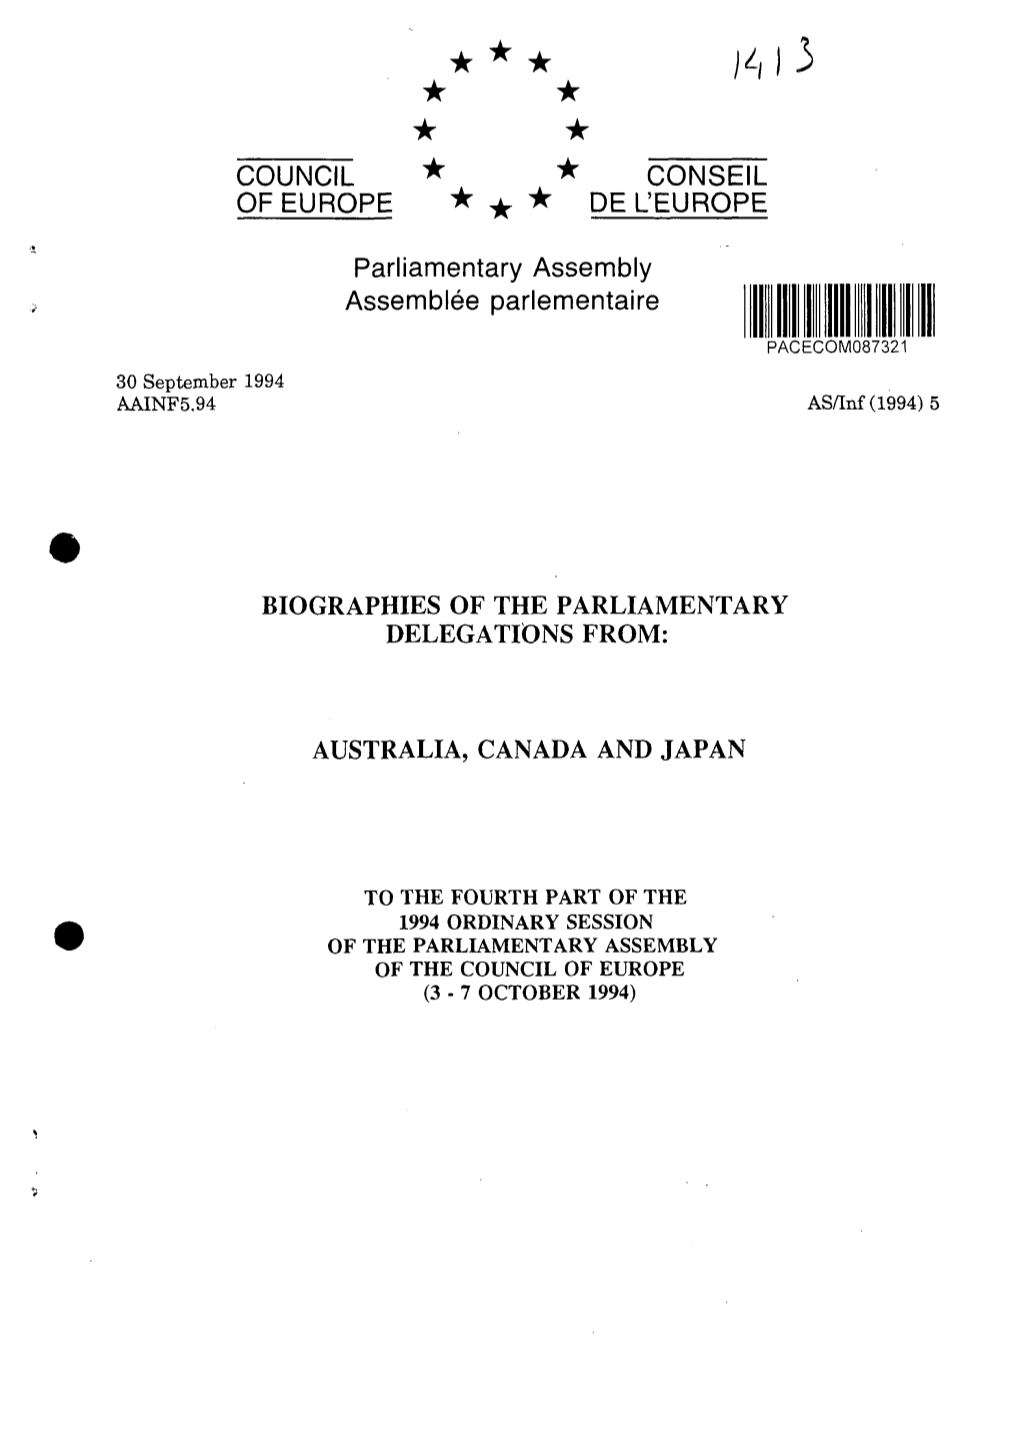 Biographies of the Parliamentary Delegation From